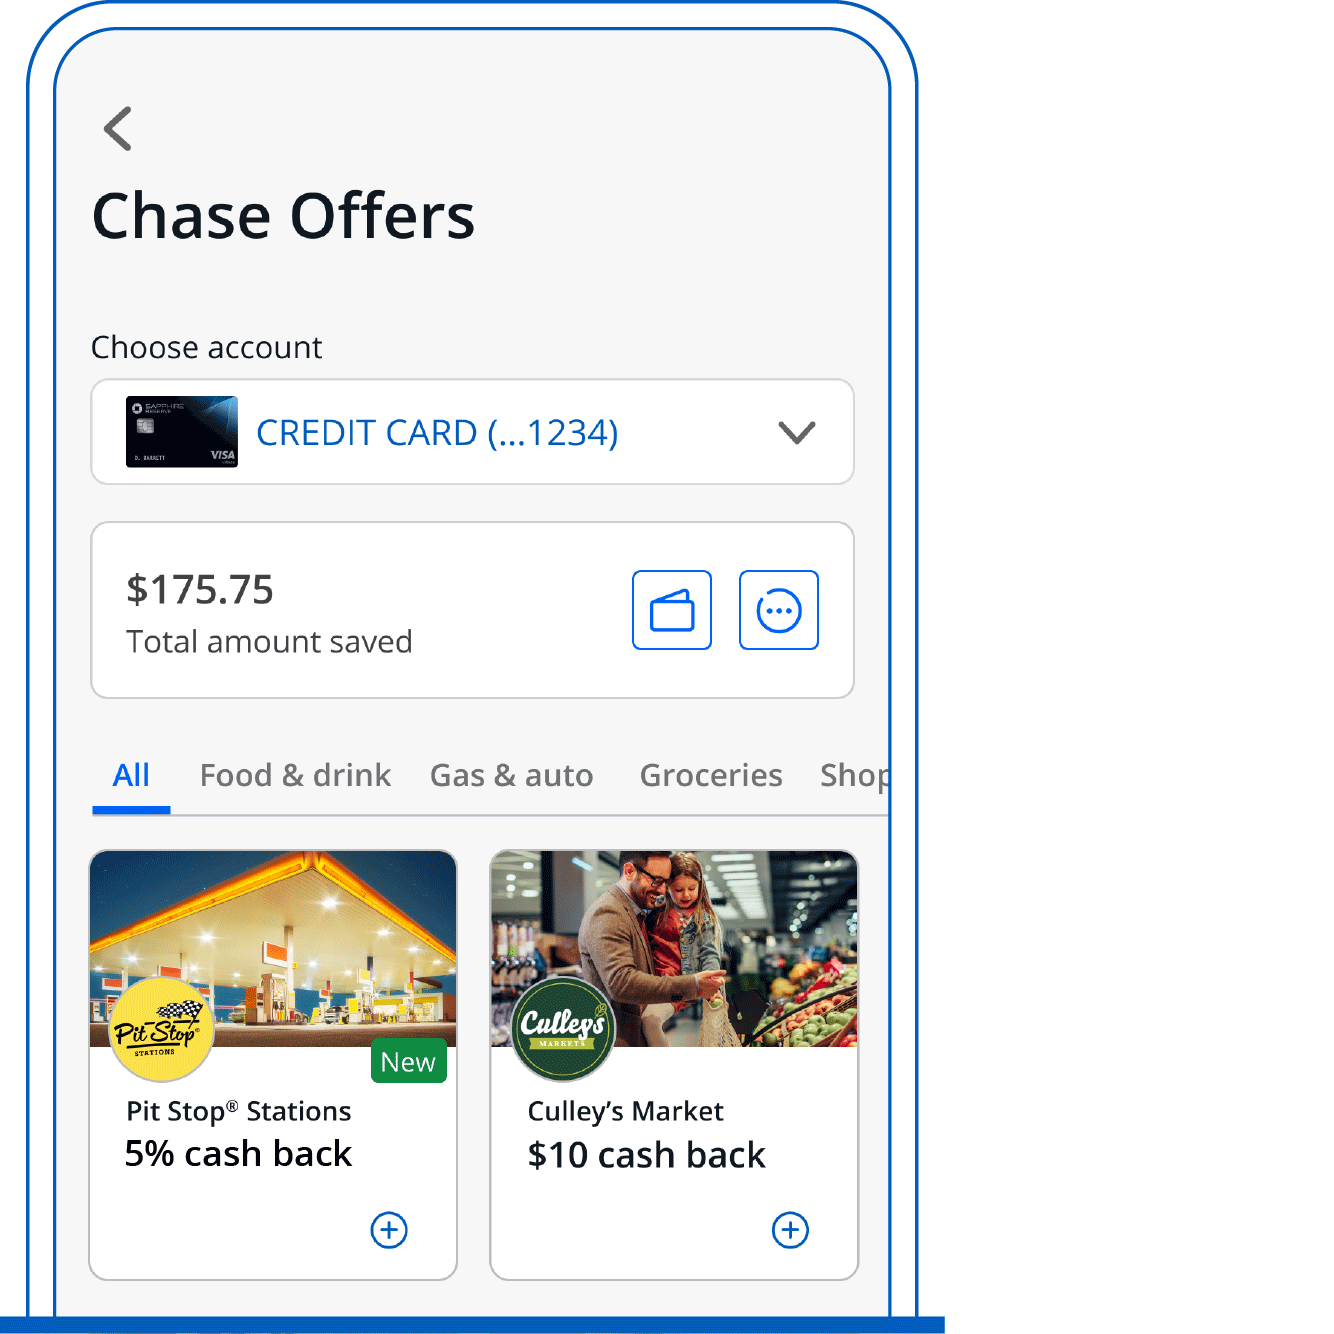 Image displaying a simulated custom offer